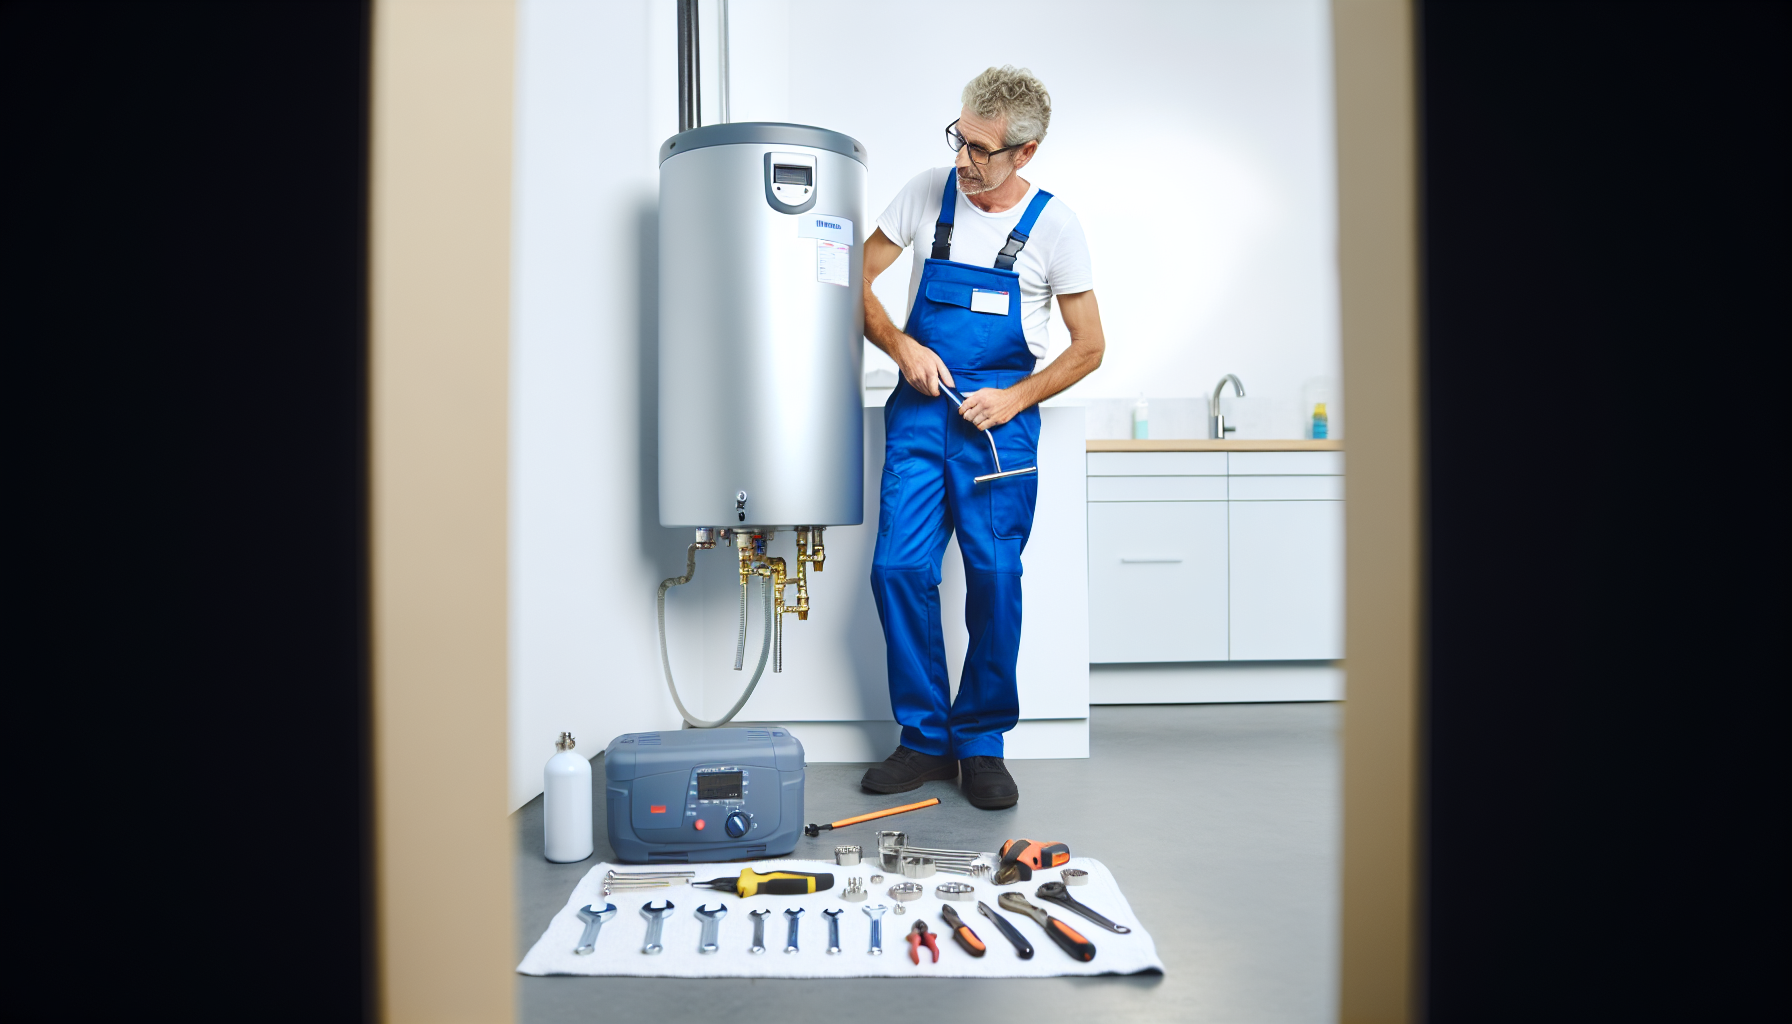 A professional plumber installing a new water heater